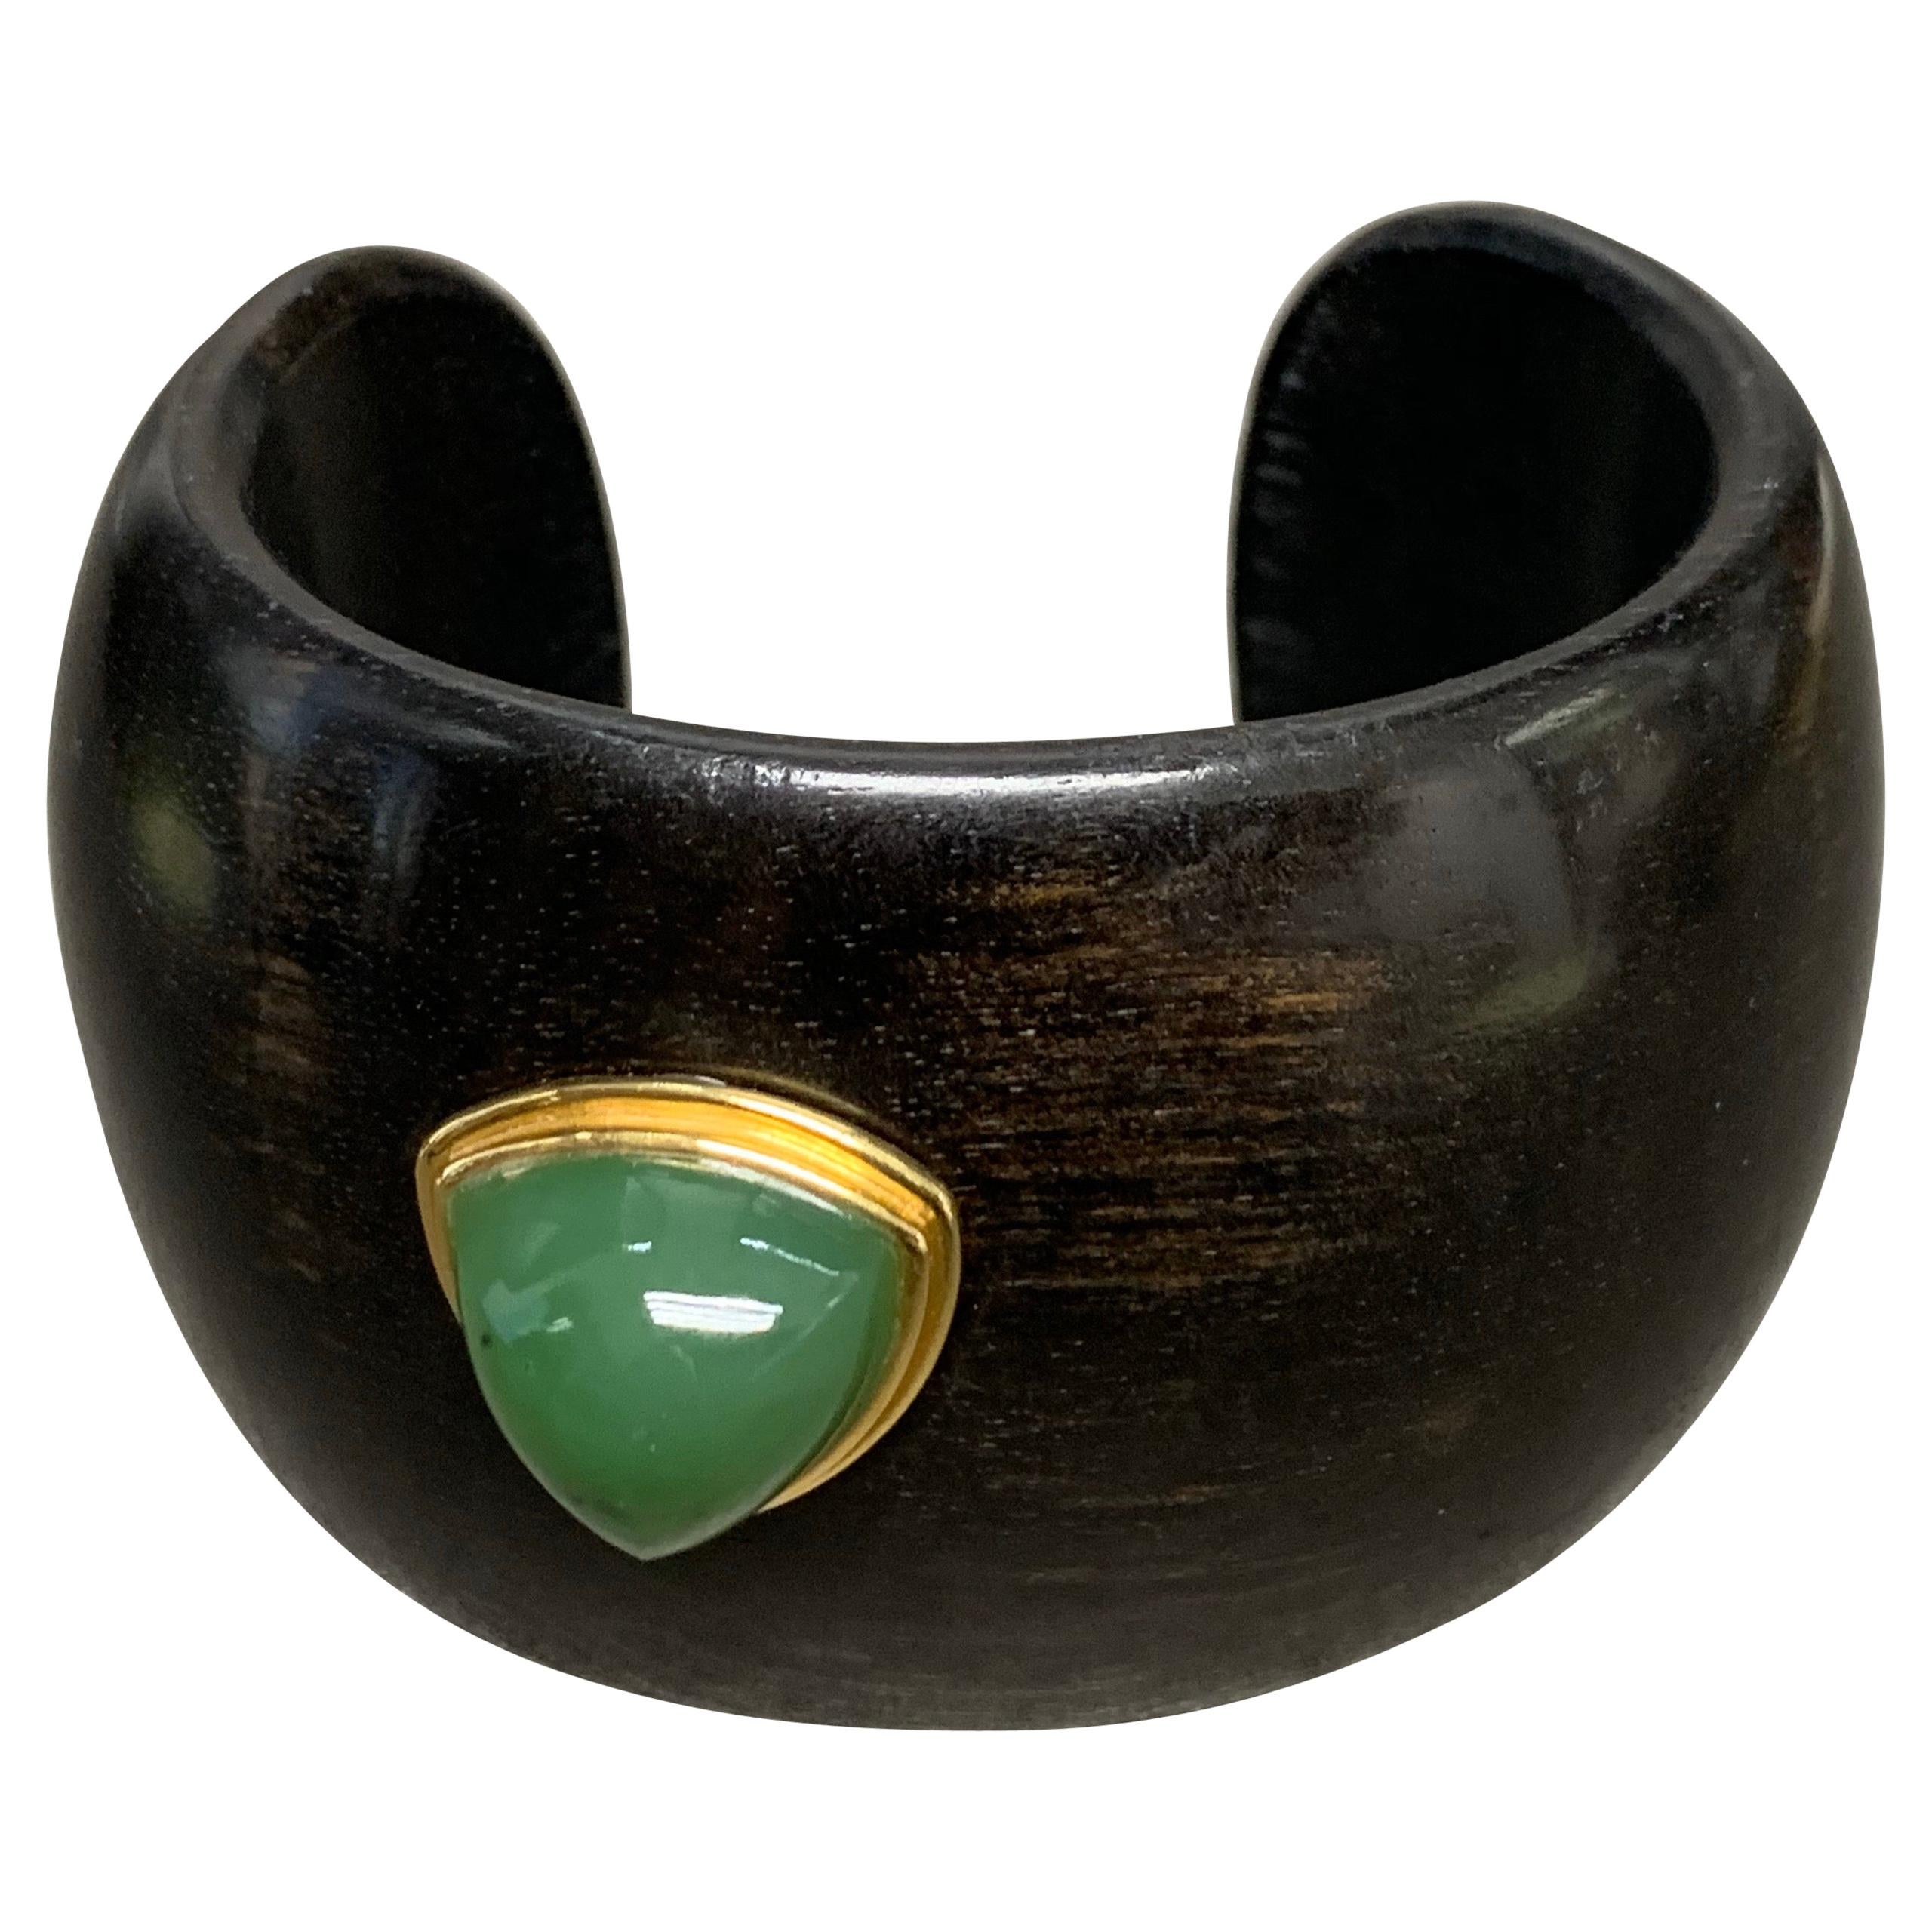 4.86 Carat Green Aventurine, Ebony Wood Bracelet, Made in Italy. 

Featuring a Green Aventurine Stone Ebony Wood Bracelet with a total weight of 4.86 carats, Hand Made in Italy

This one-of-a-kind bracelet was created by hand in Italy is certified,